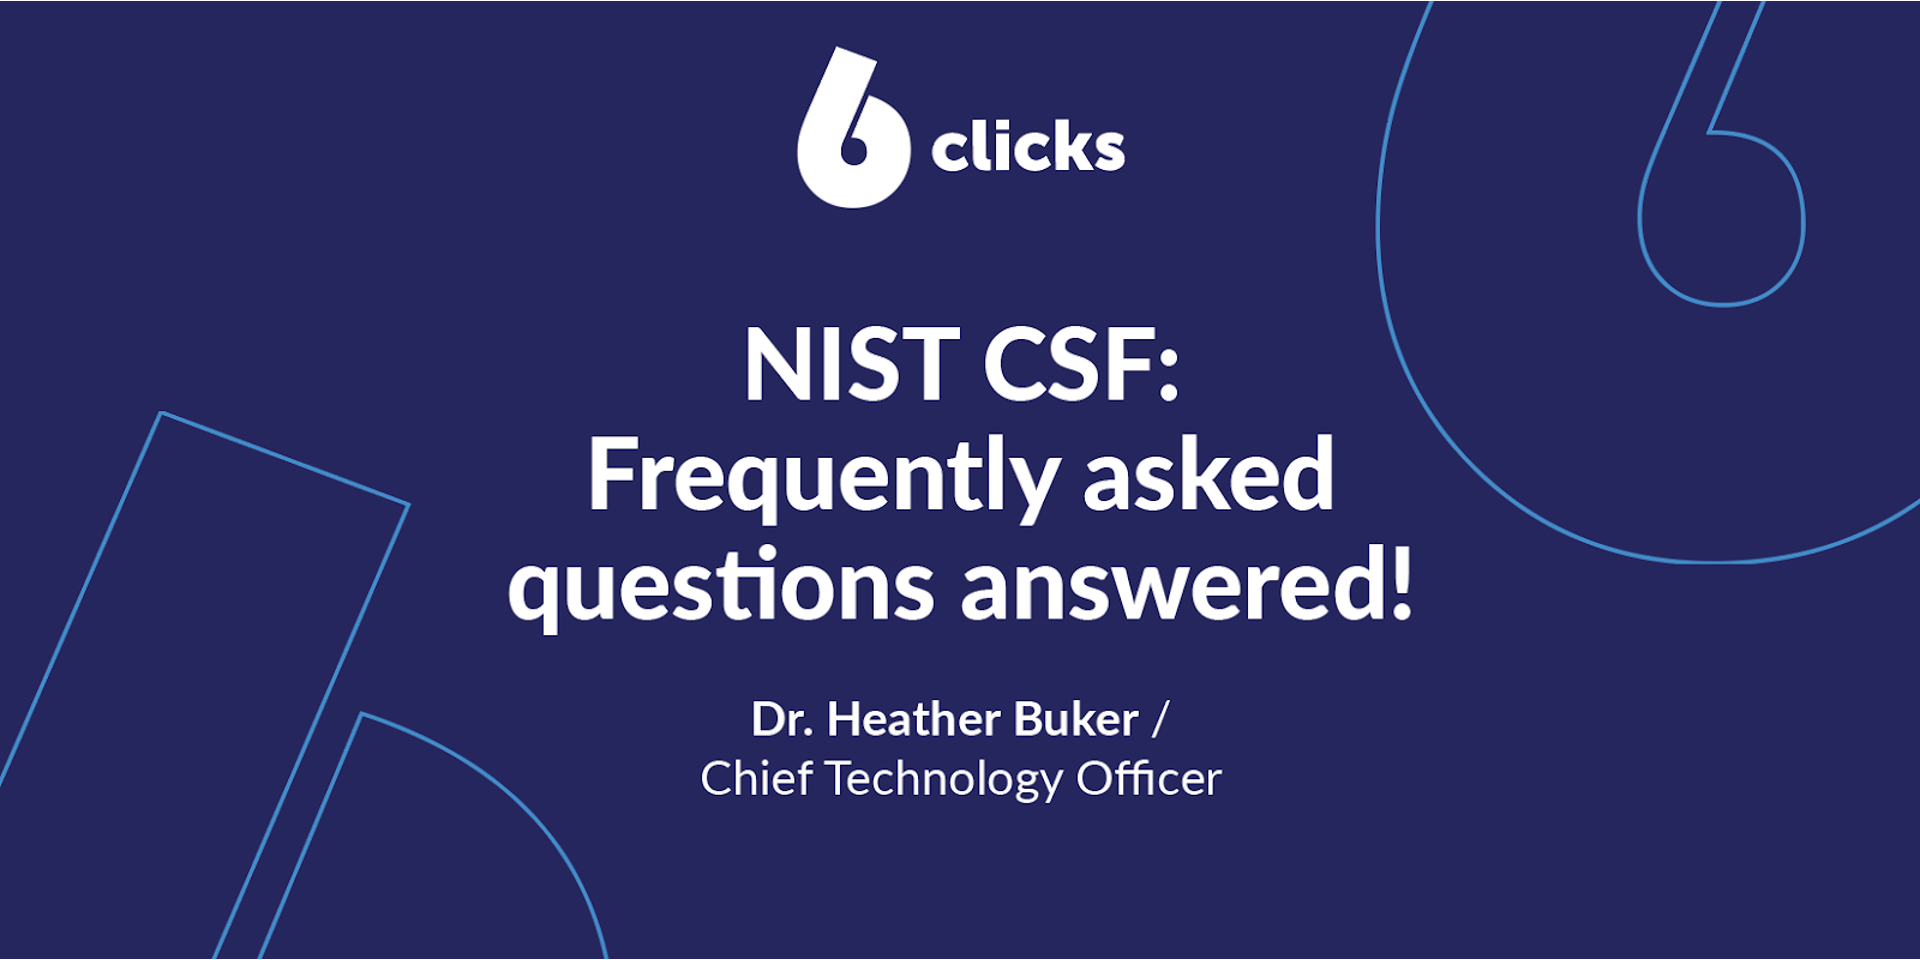 NIST cybersecurity framework: Frequently asked questions answered! By Dr Heather Buker (6clicks)